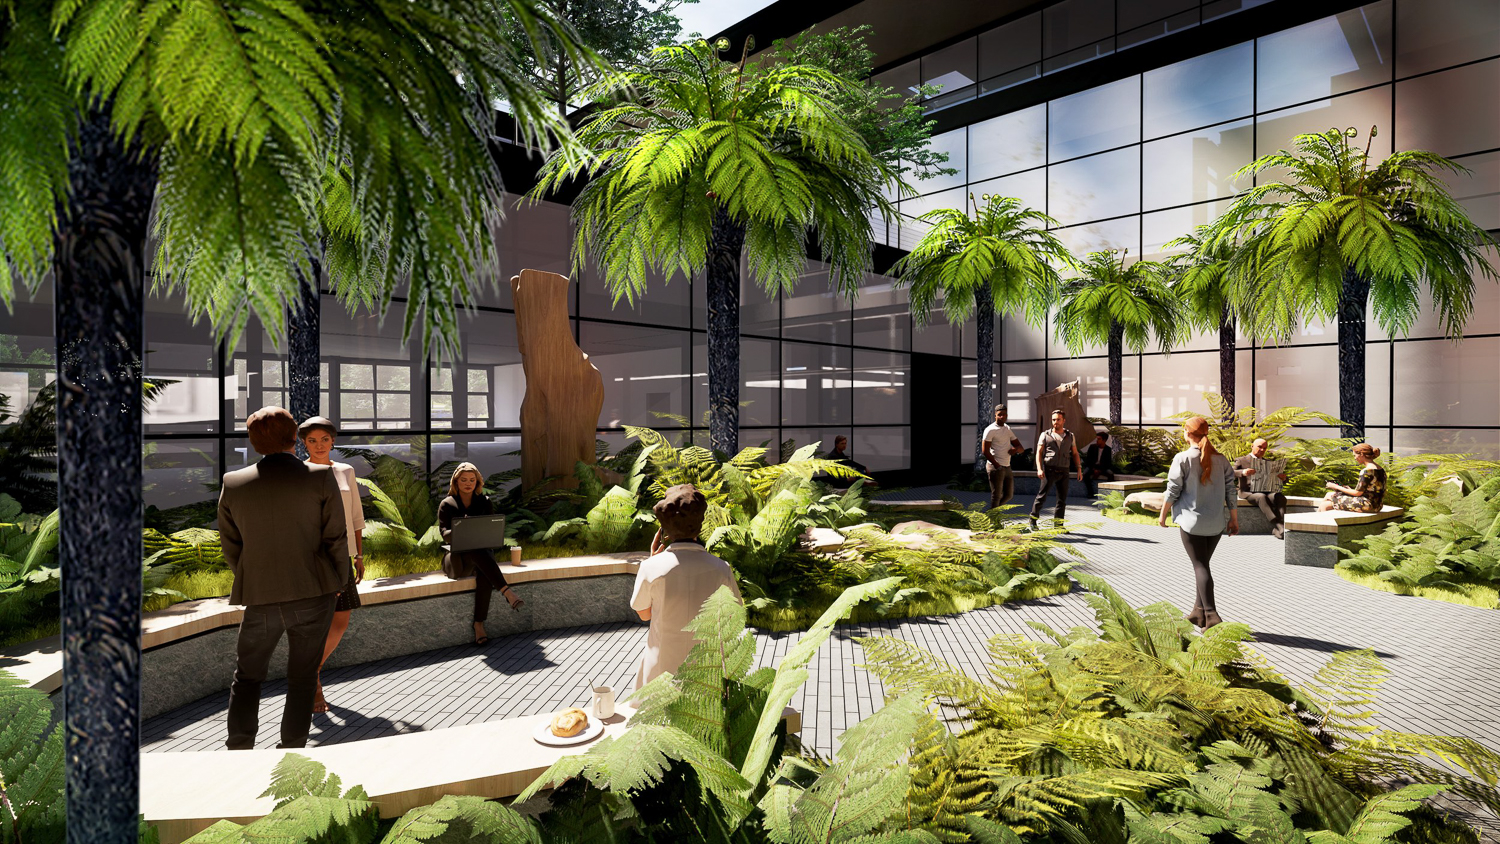 YouTube HQ fern-adorned courtyard, rendering by SHoP Architects and Surfacedesign